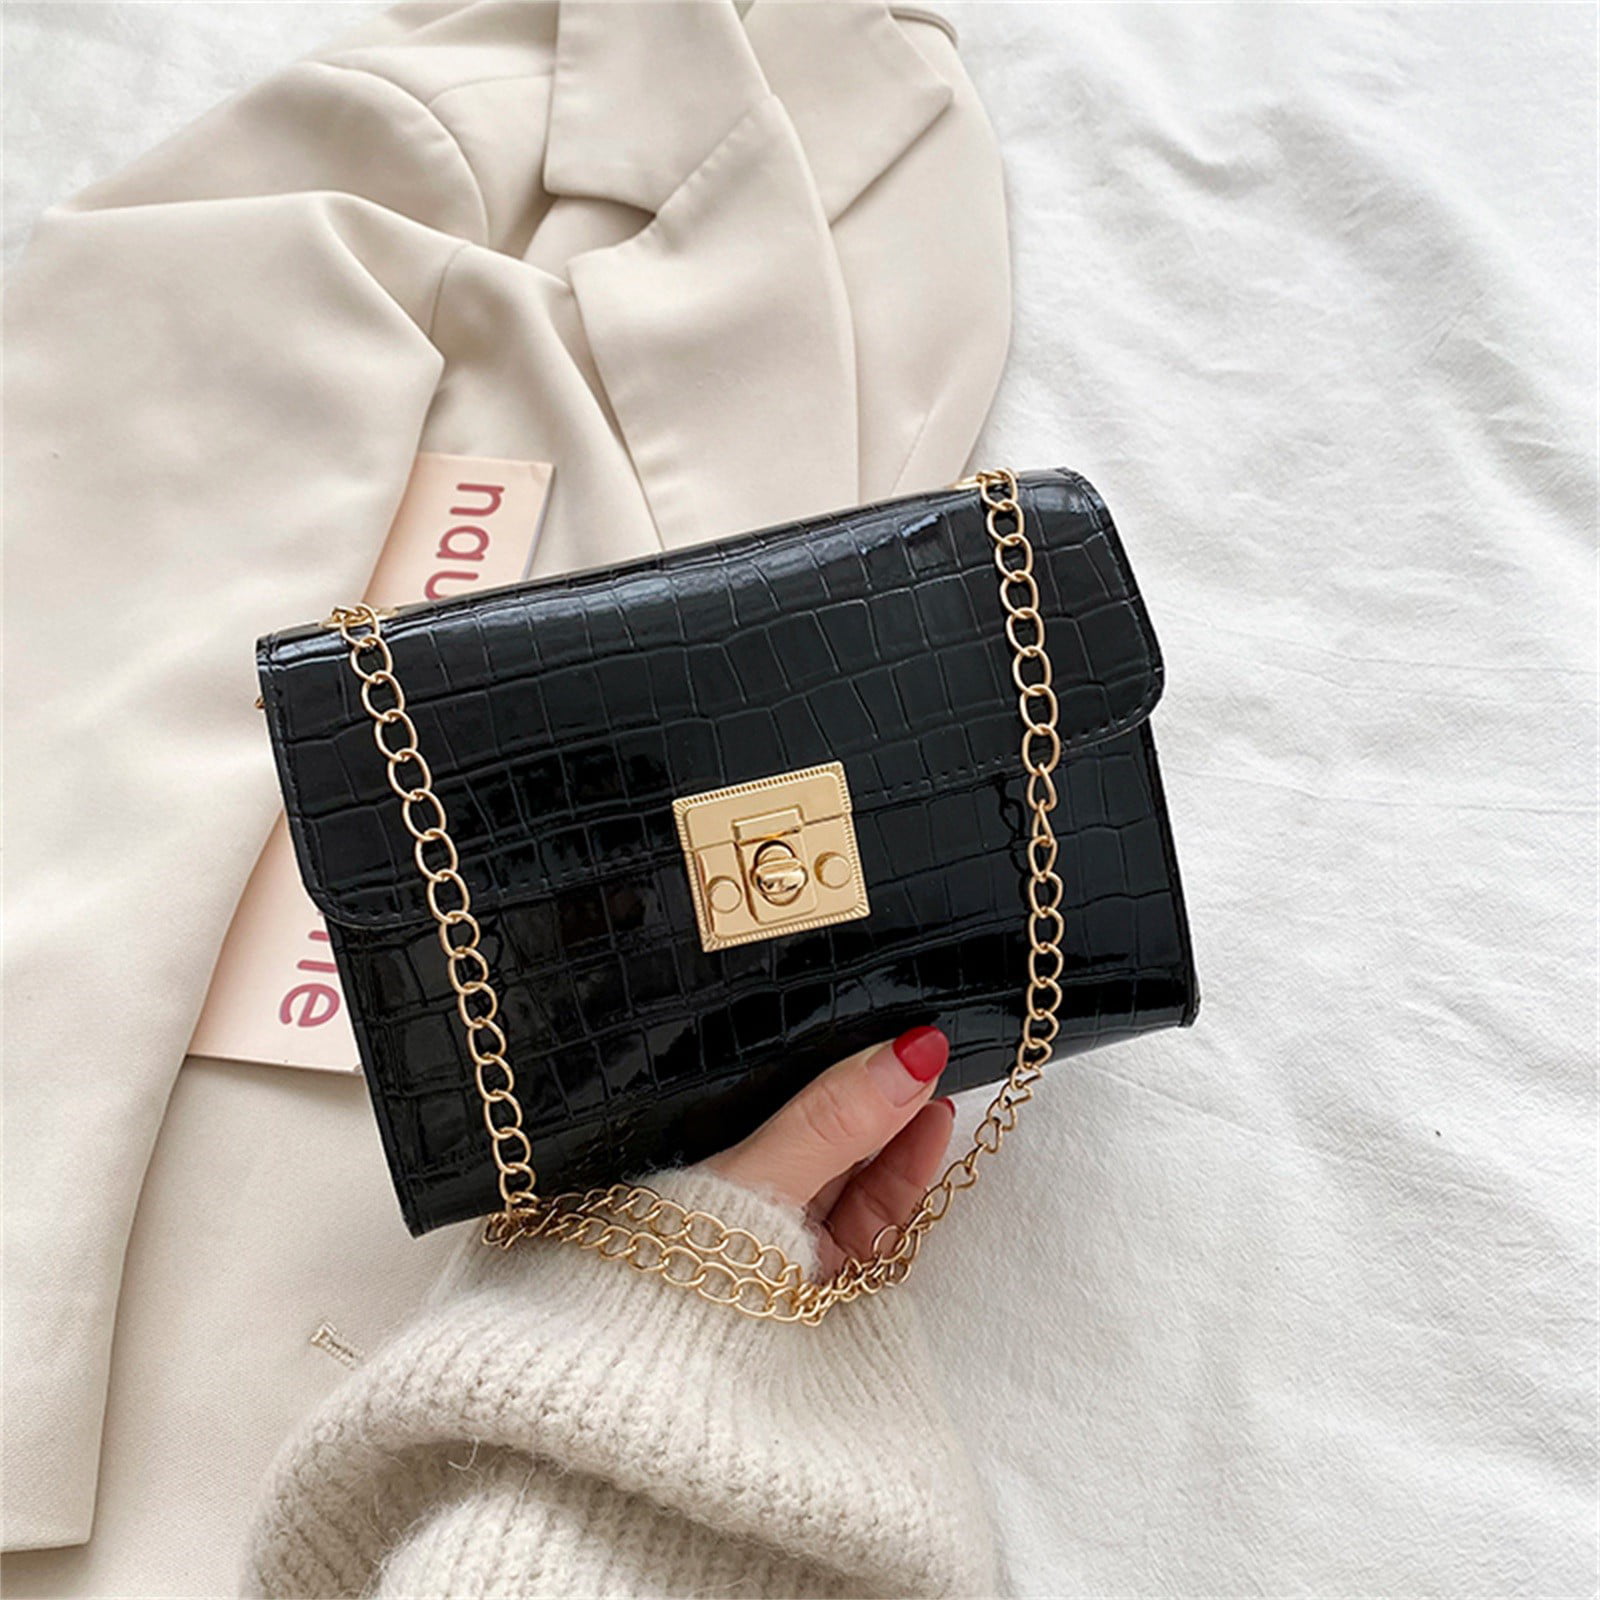 Solid Leather Messenger Bag Stone Pattern Small Bags 2019 Women New Fashion Shoulder Bag Elegant Chain Square Bag 